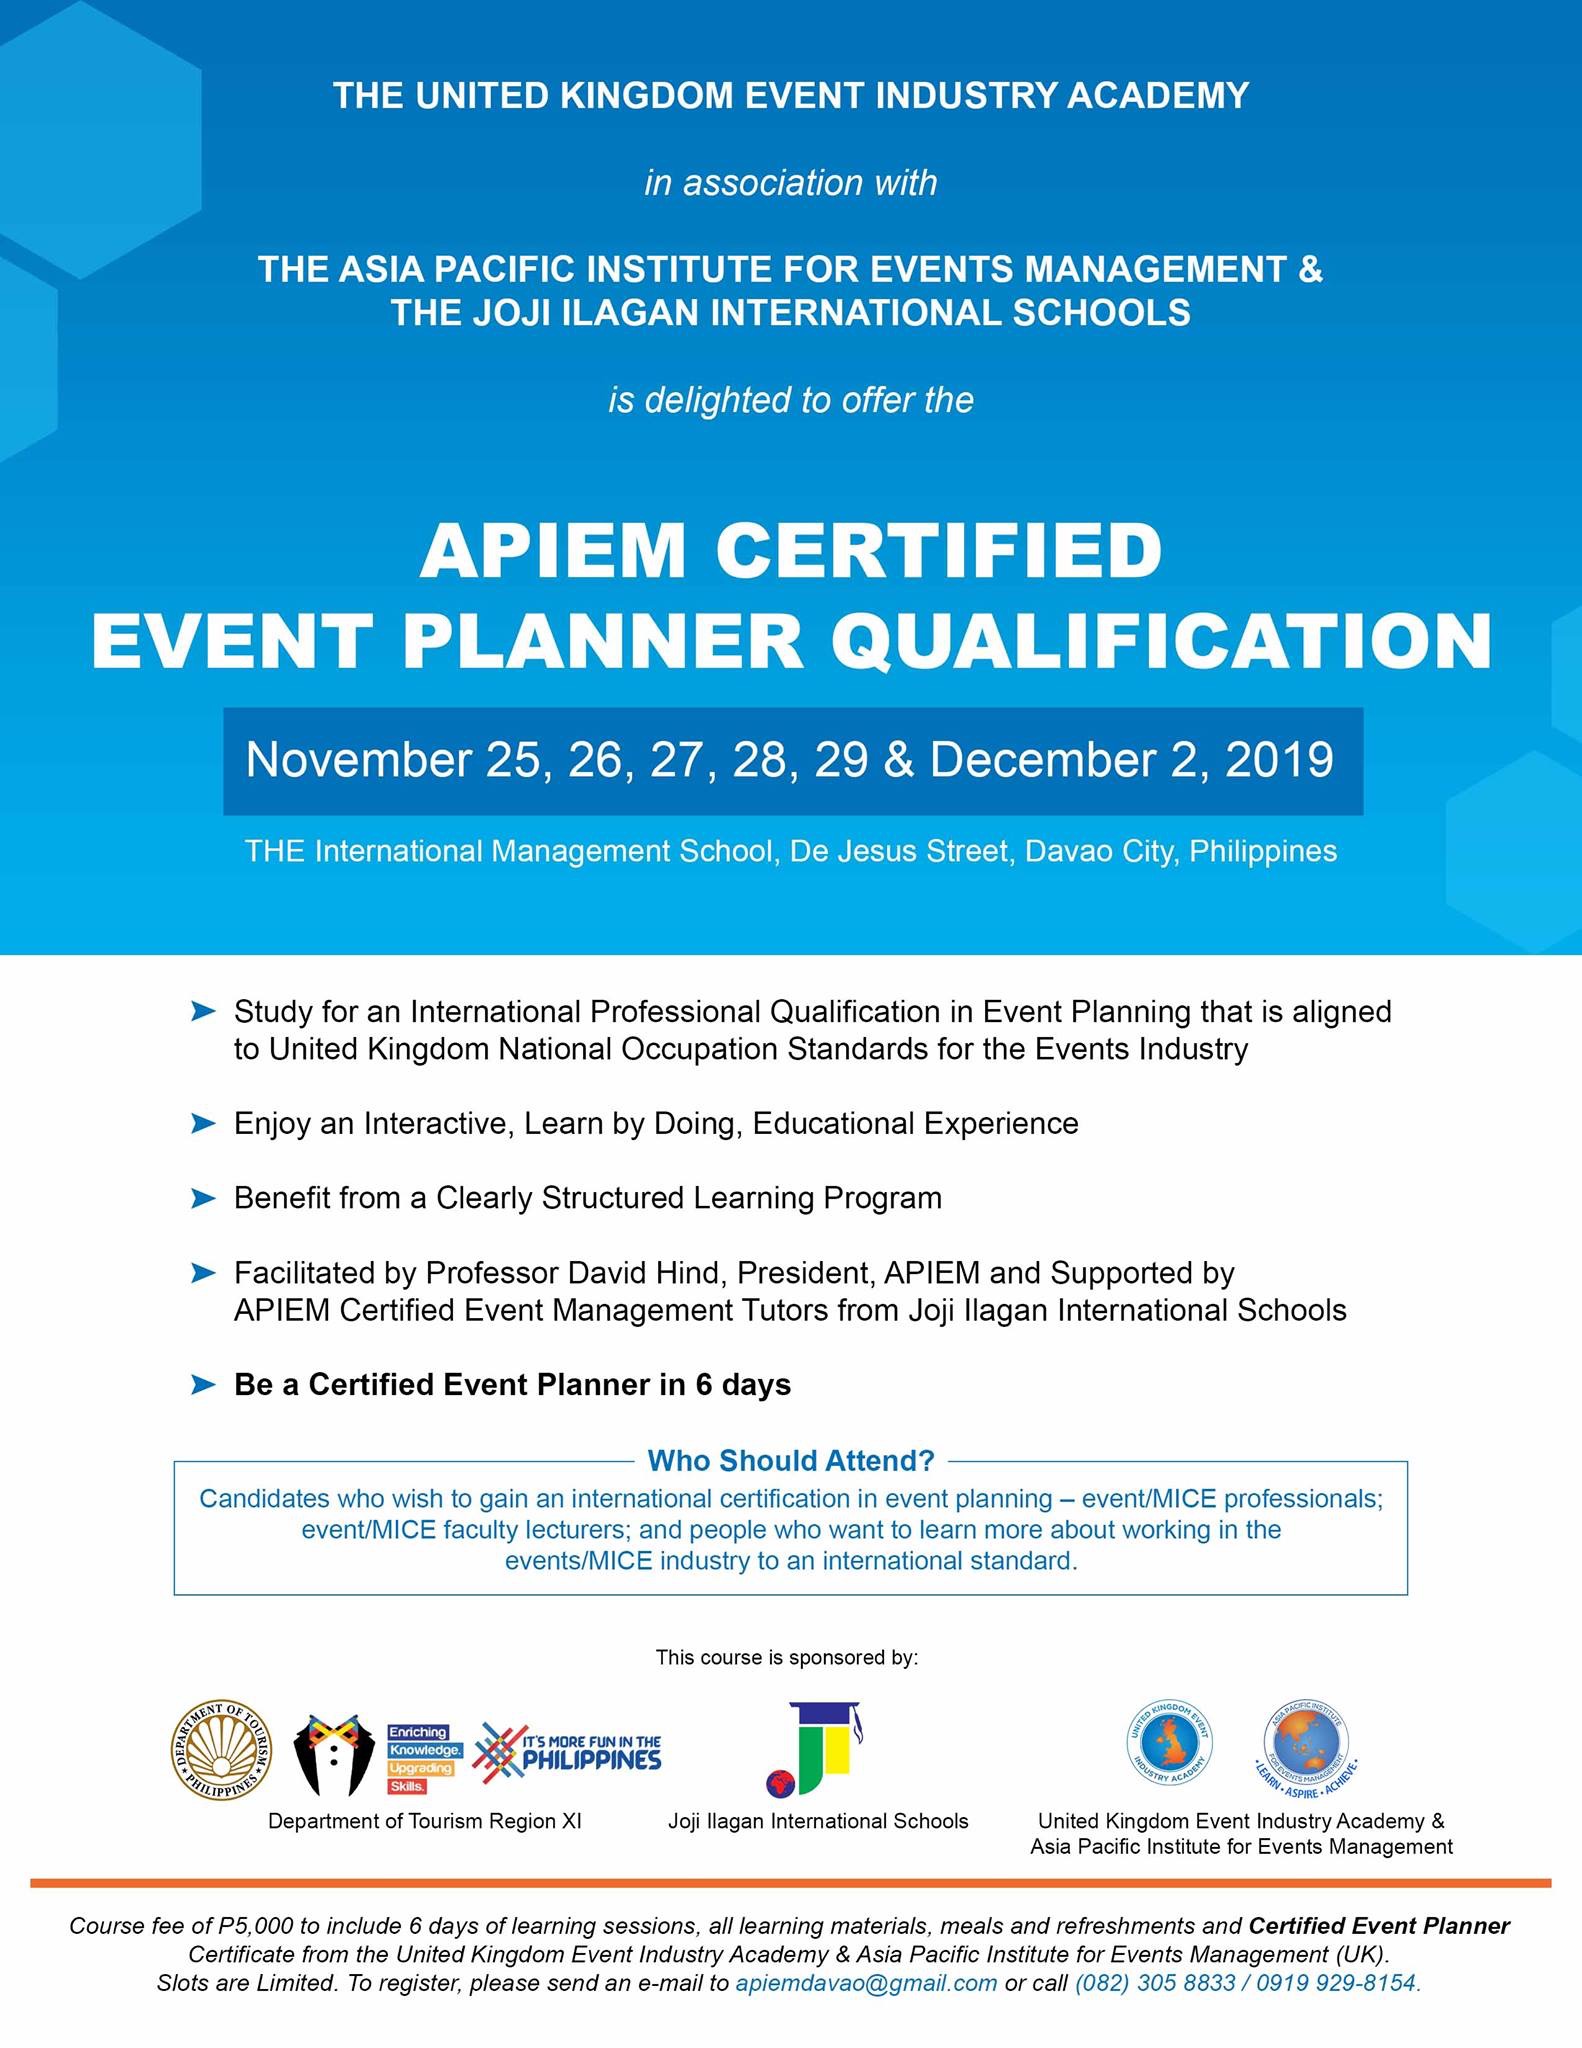 The APIEM Certified Event Planner Qualification is Offered in the Philippines